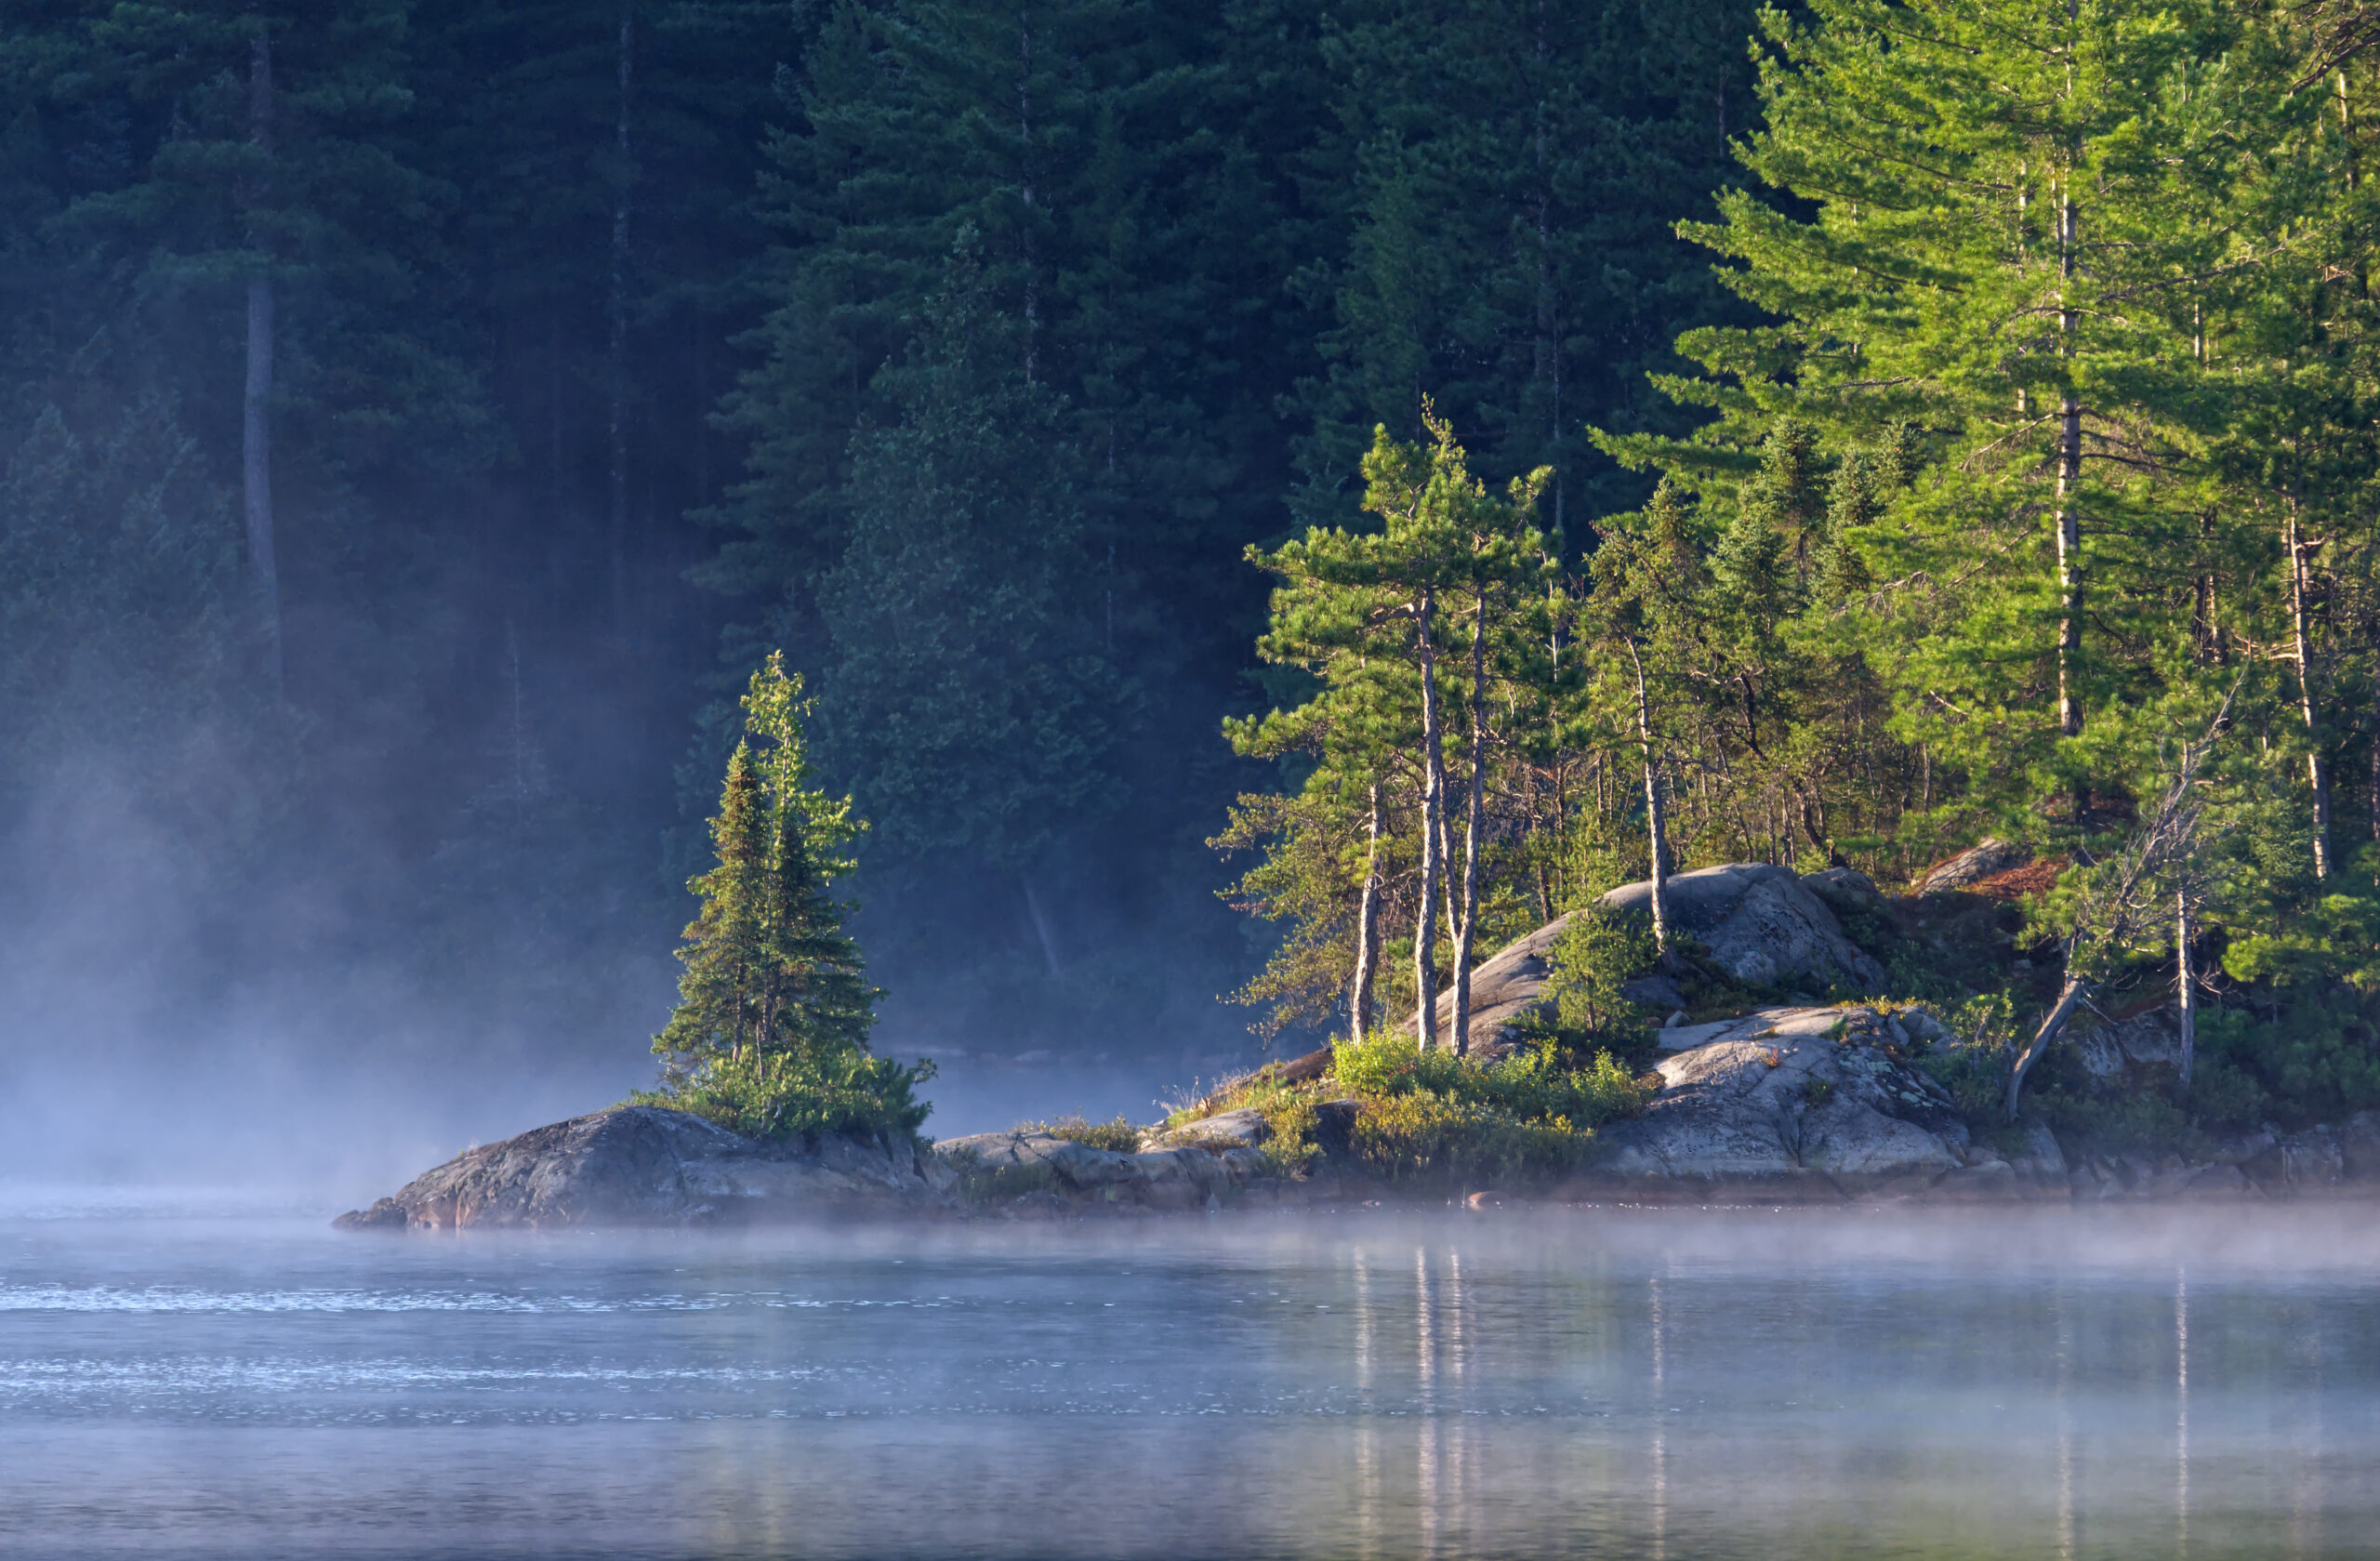 In the Ontario forests of Temagami, mist rises from a lake with early morning sunlight beaming onto conifer trees growing out of rocks at the water's edge.